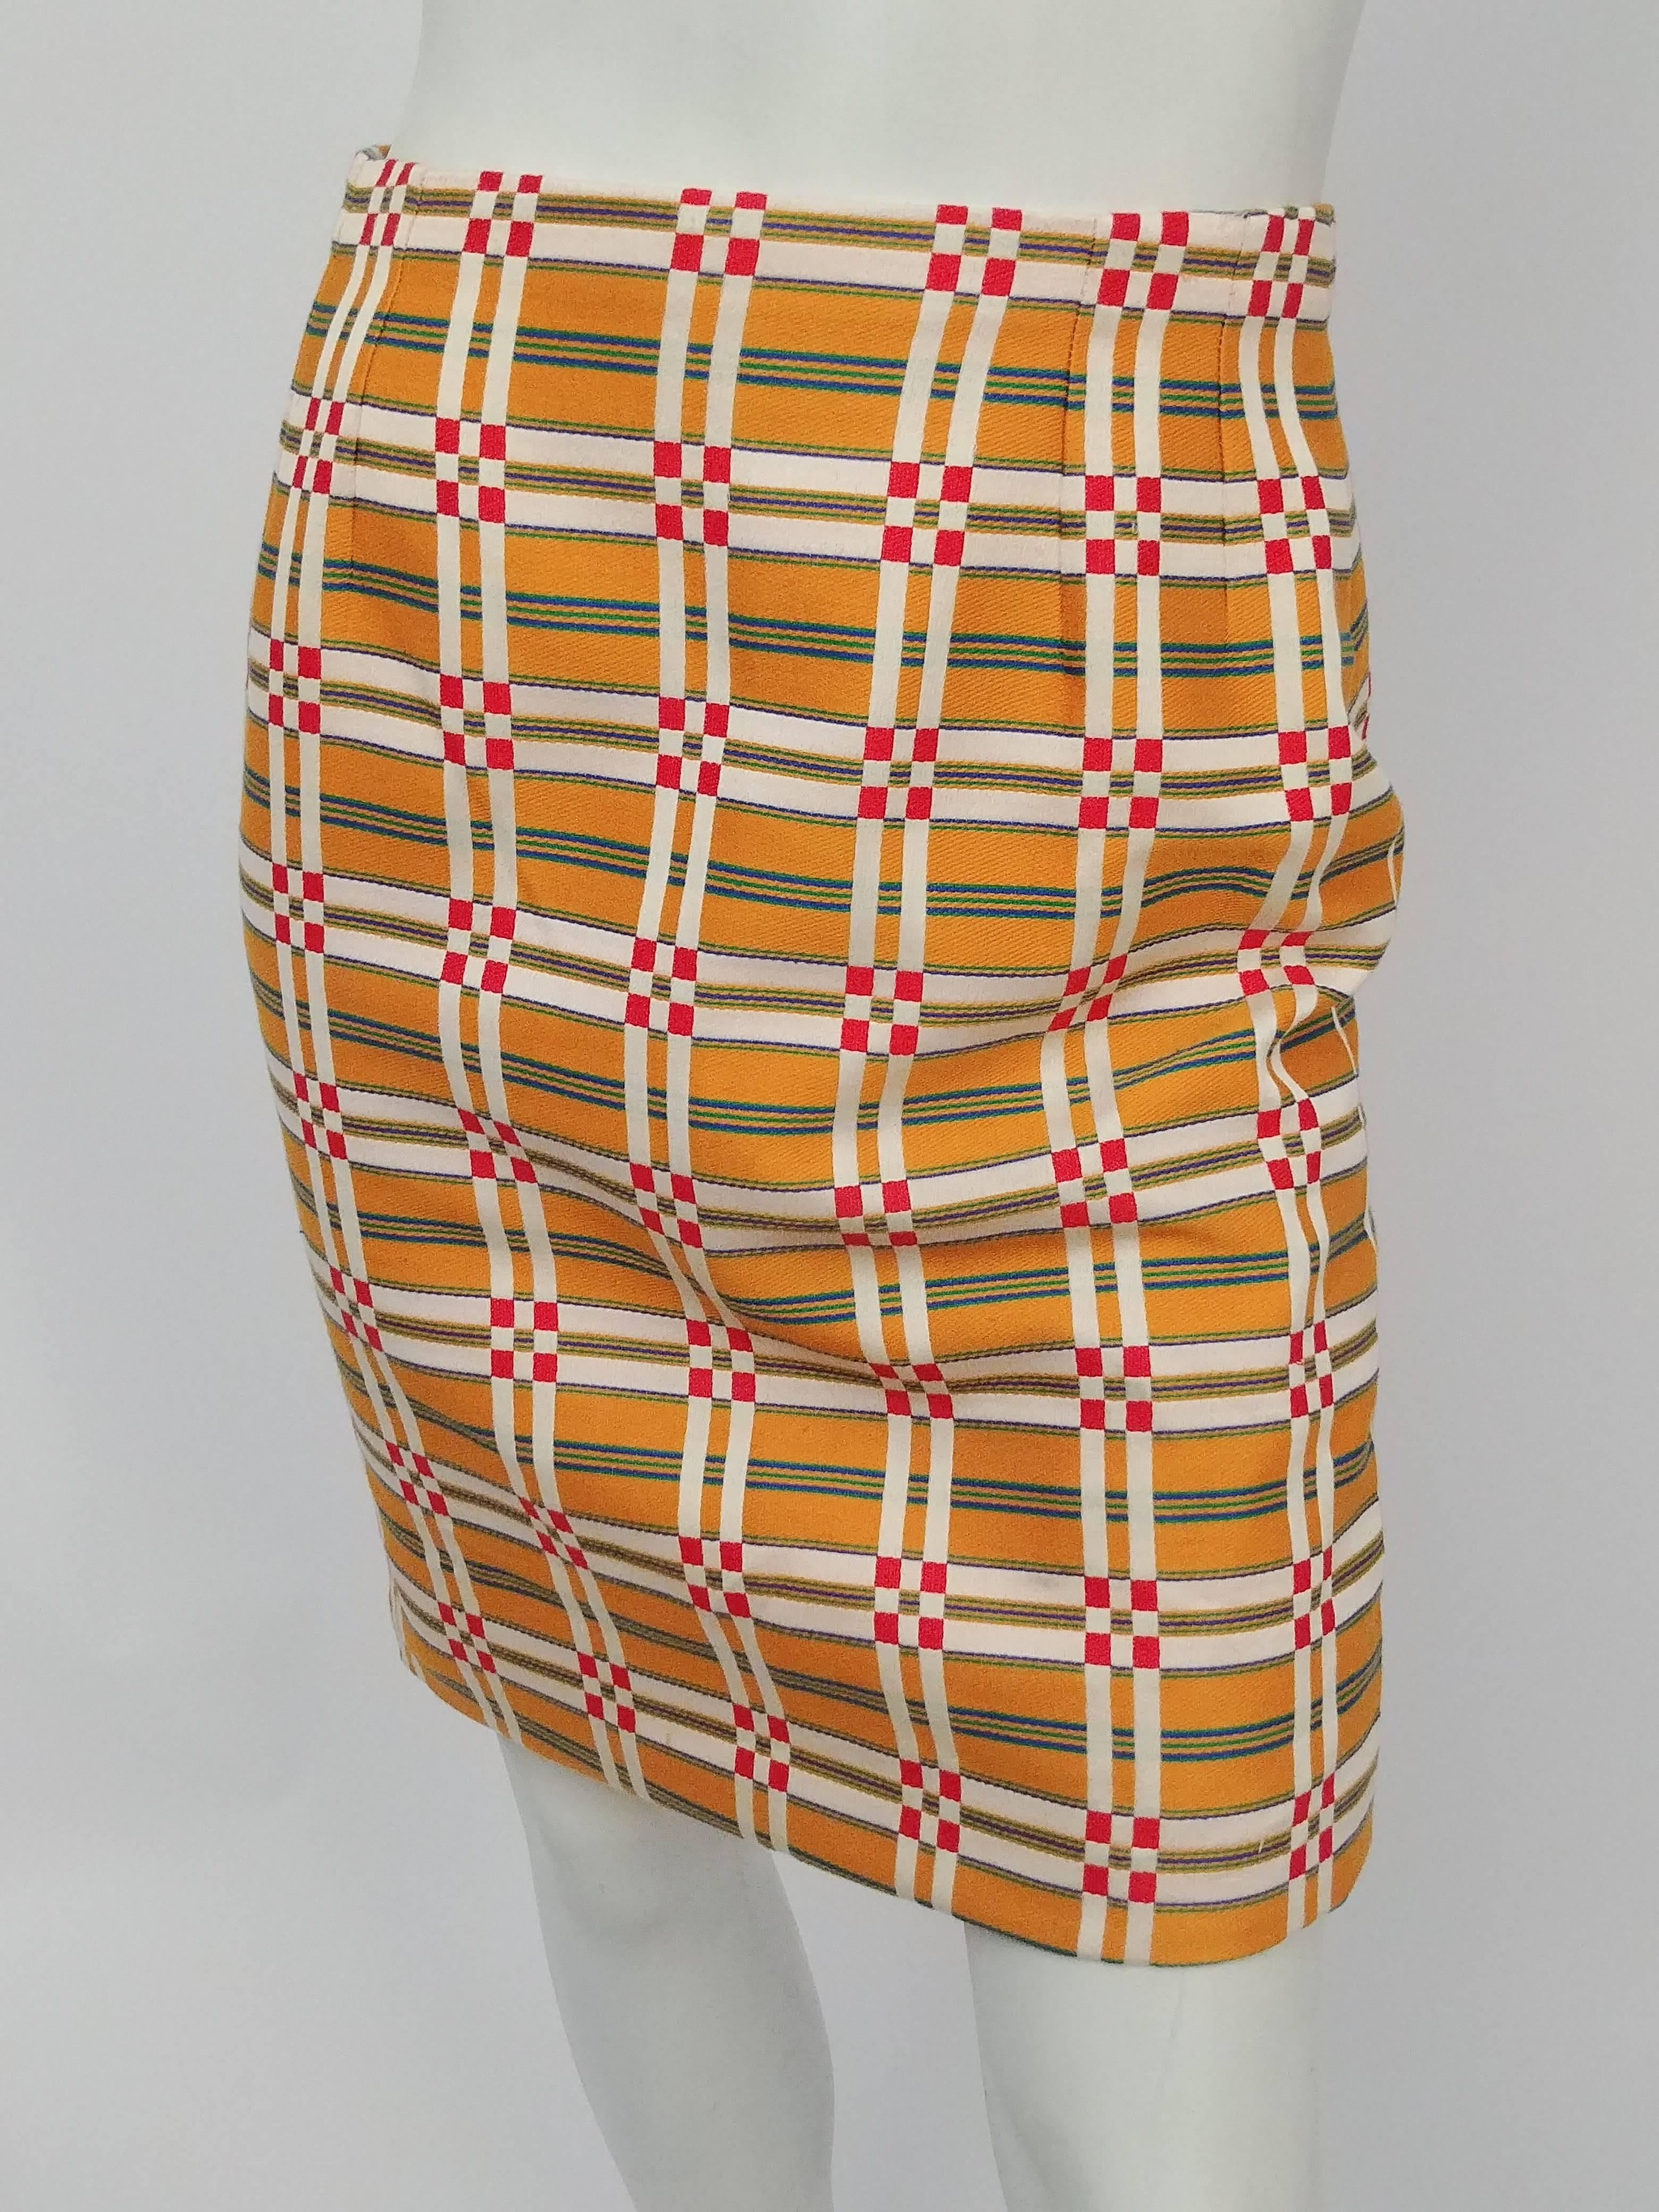 Bill Blass Orange Plaid Skirt Suit with Wax Seal Buttons, 1980s  1